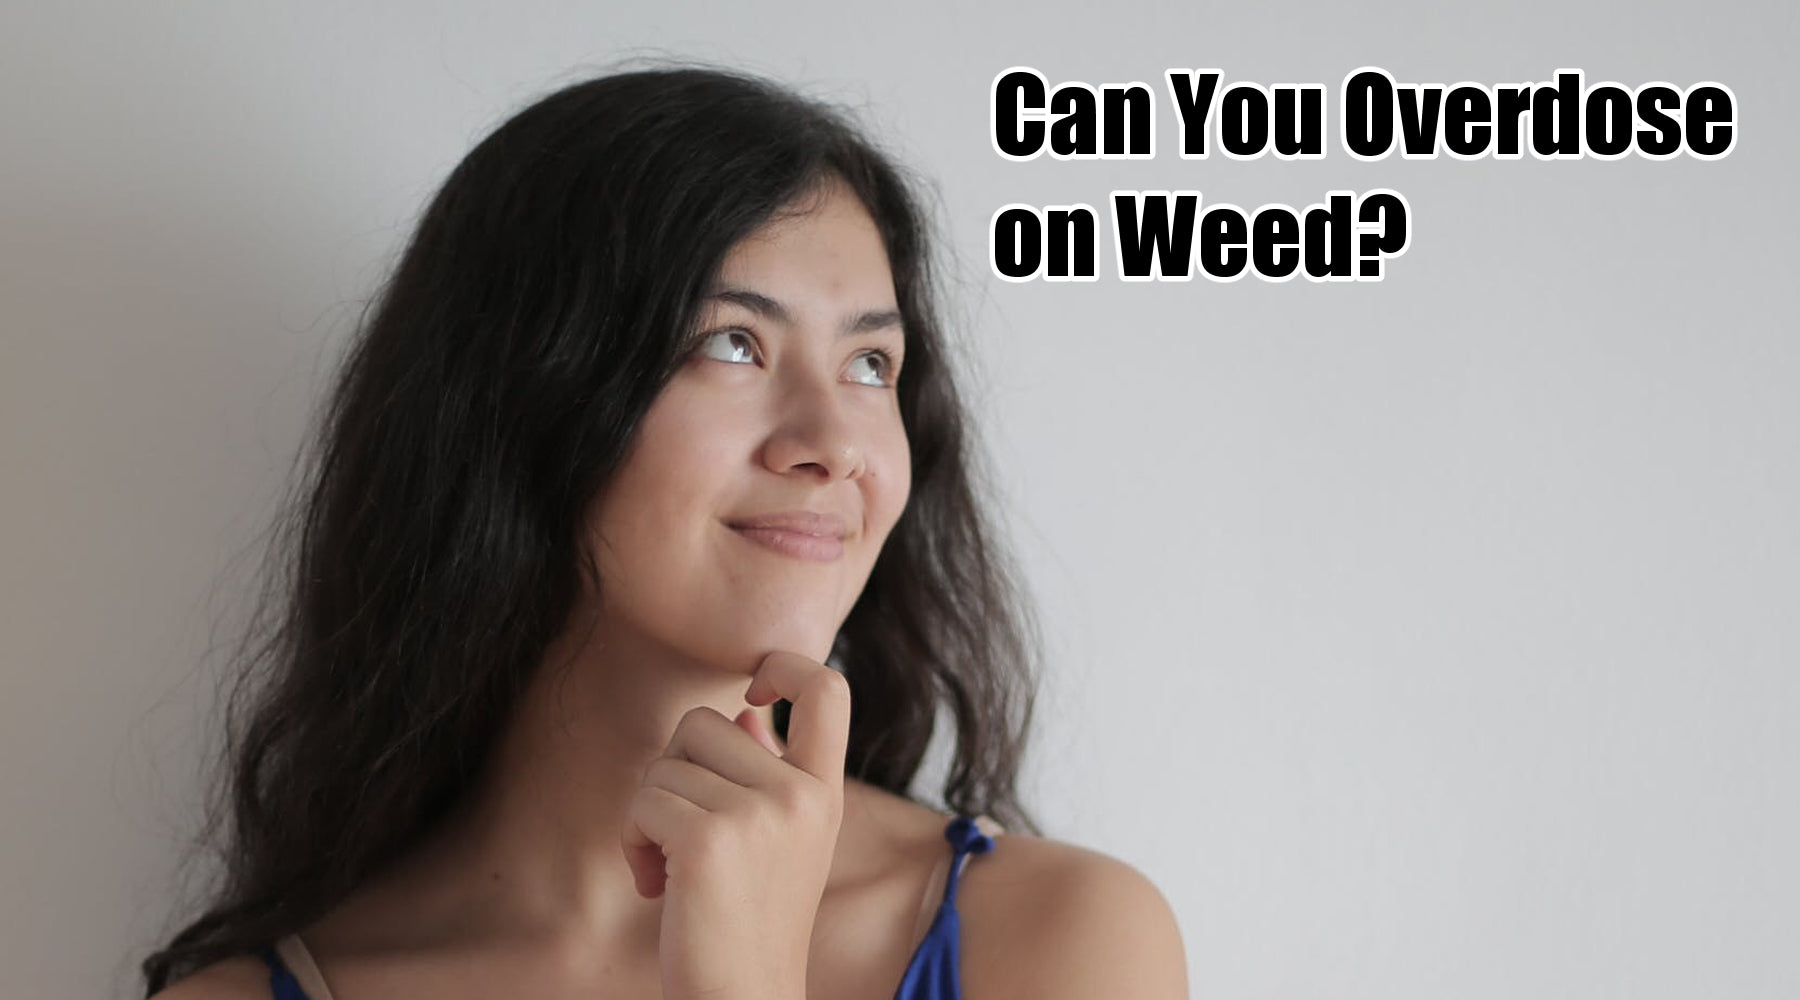 Can You Overdose on Weed?